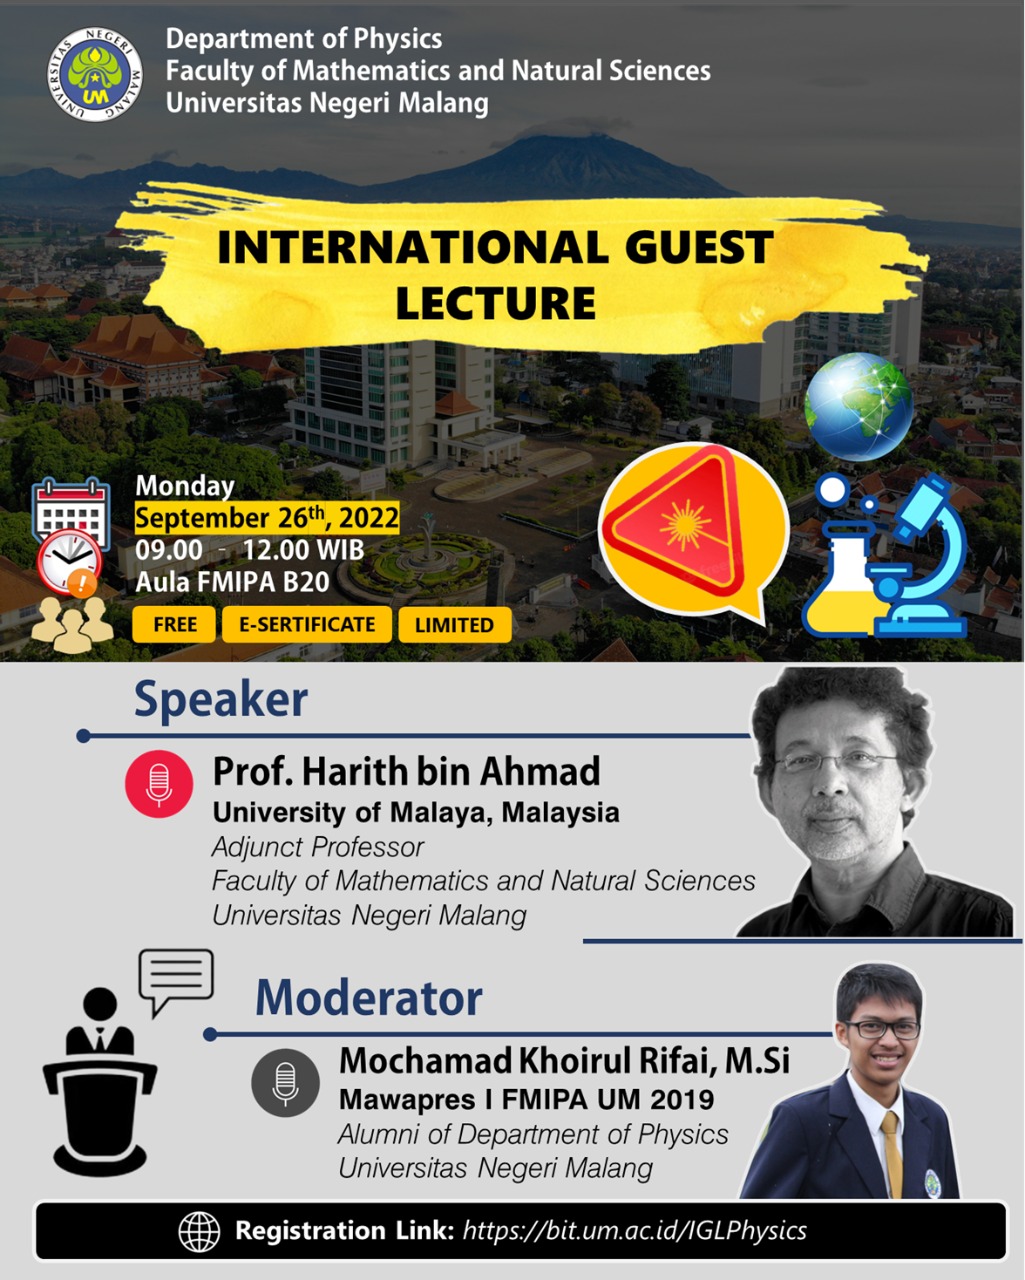 International guest lecture